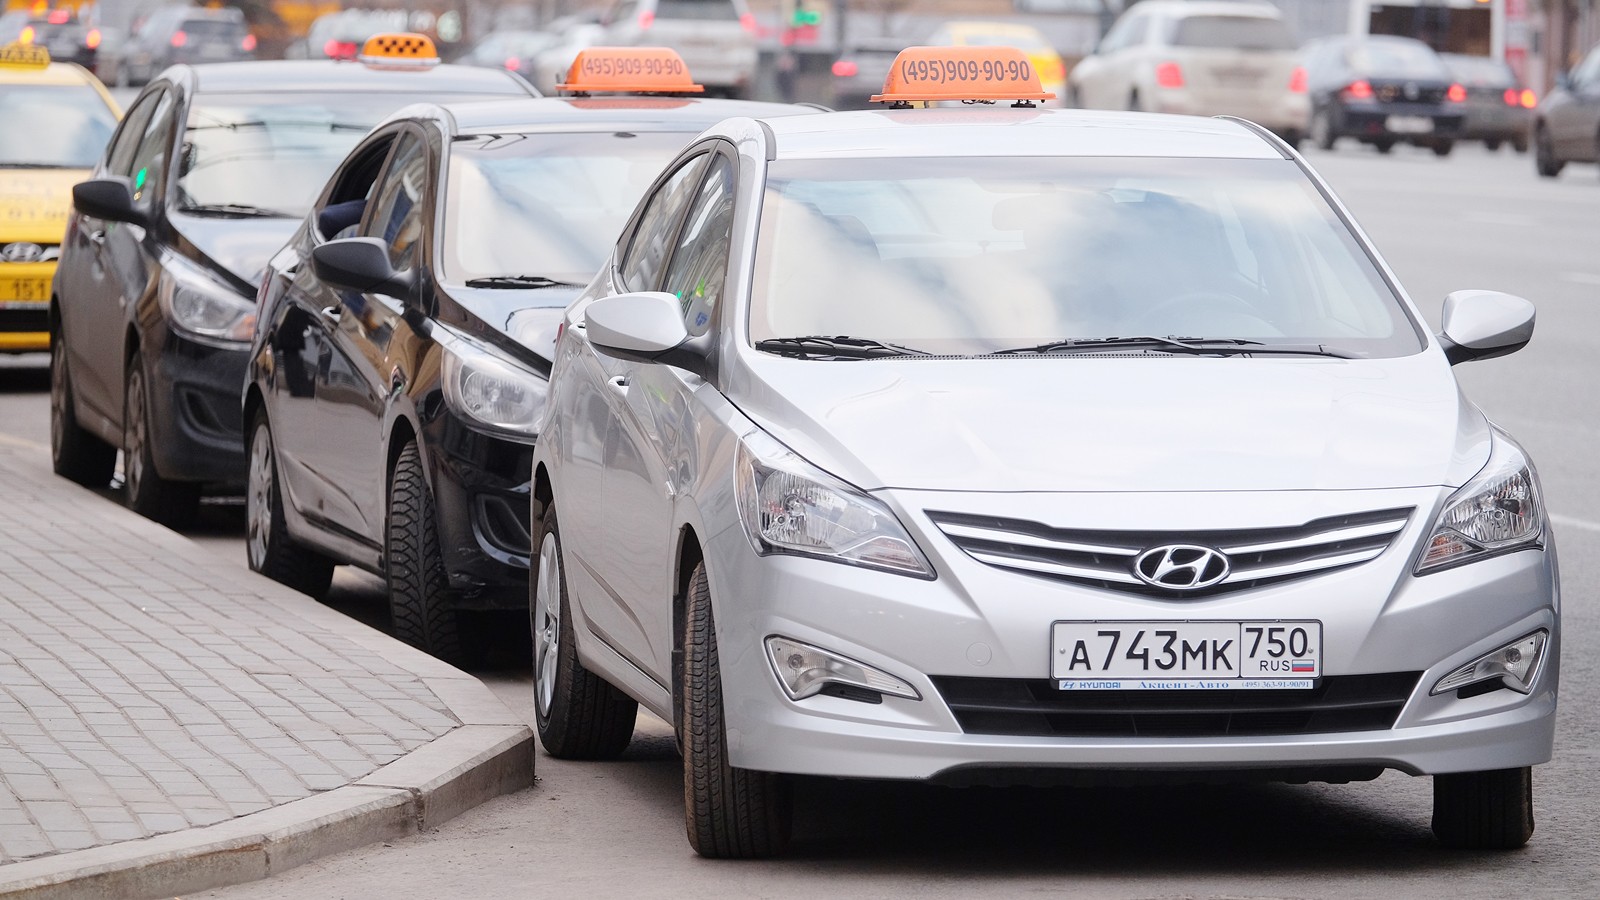 Taxis waits for passengers. Taxi cars on the street of Moscow